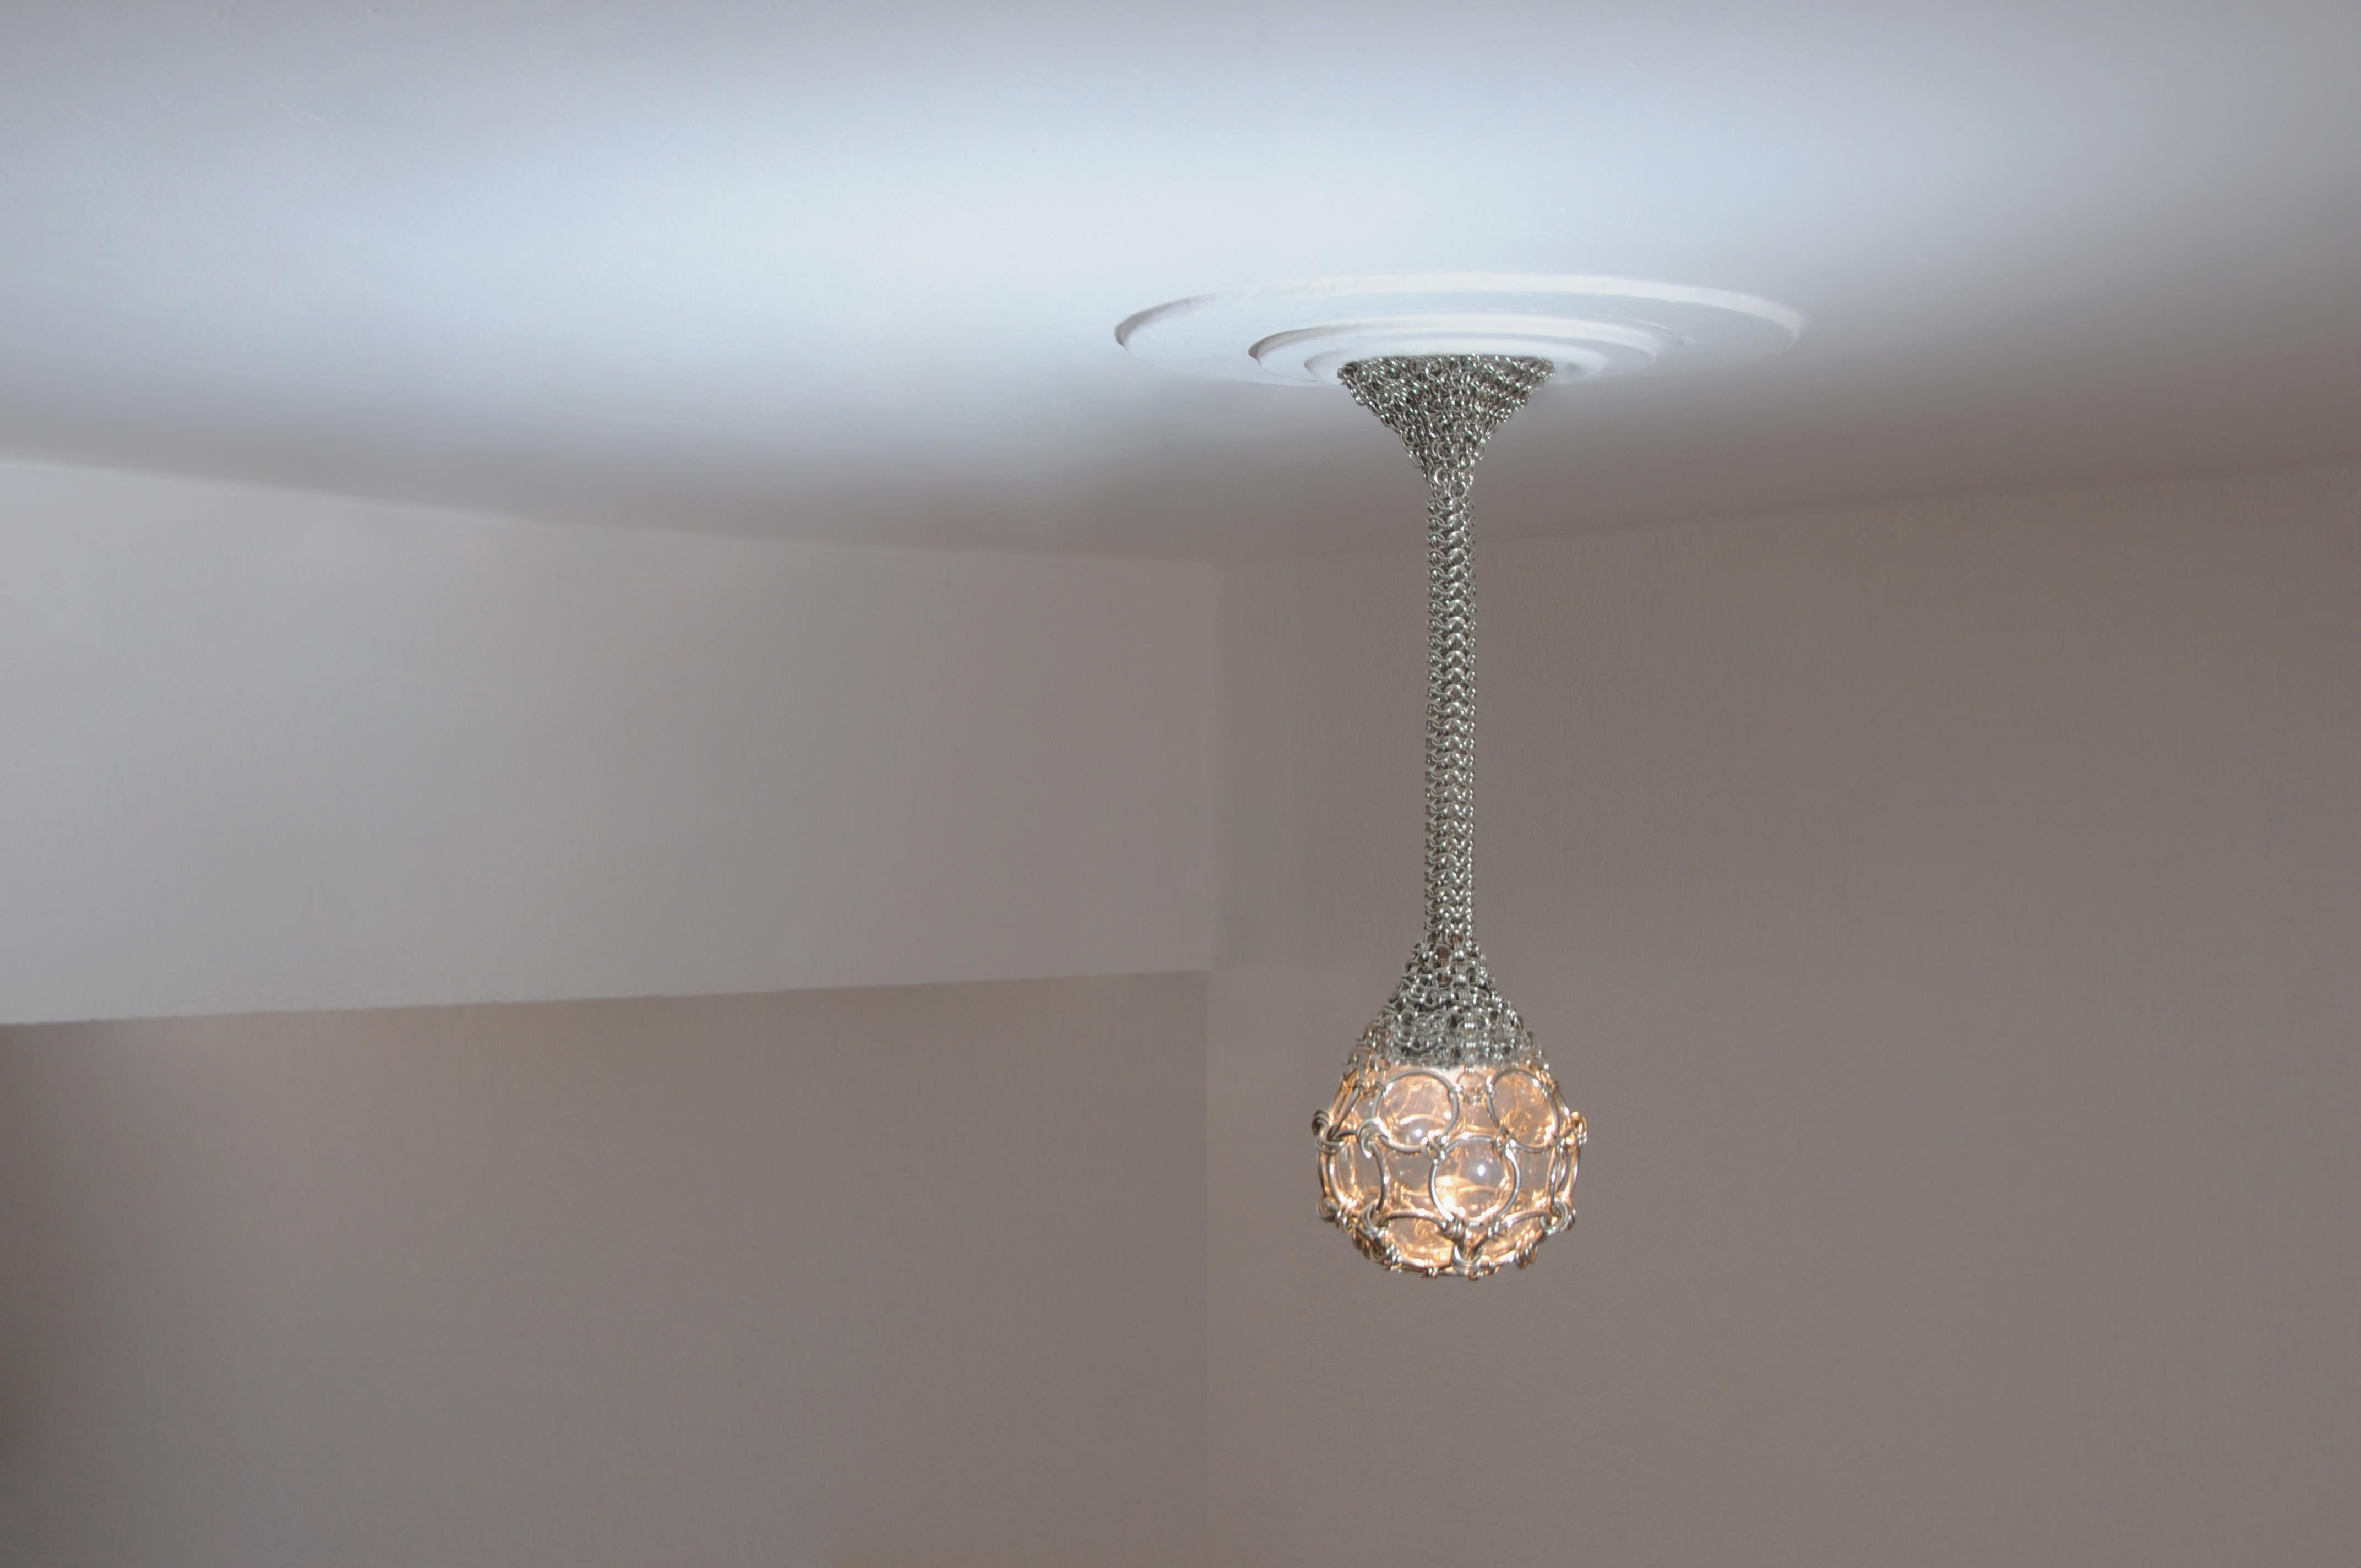 Single Pendant Chainmail Droplet Sculptural Chandelier is a beautiful hand made light piece. A chainmail web hugs the lamp’s canopy, as the knit gets tighter the chainmail envelopes into a rope which hangs to finally suspend a glass globe. All the